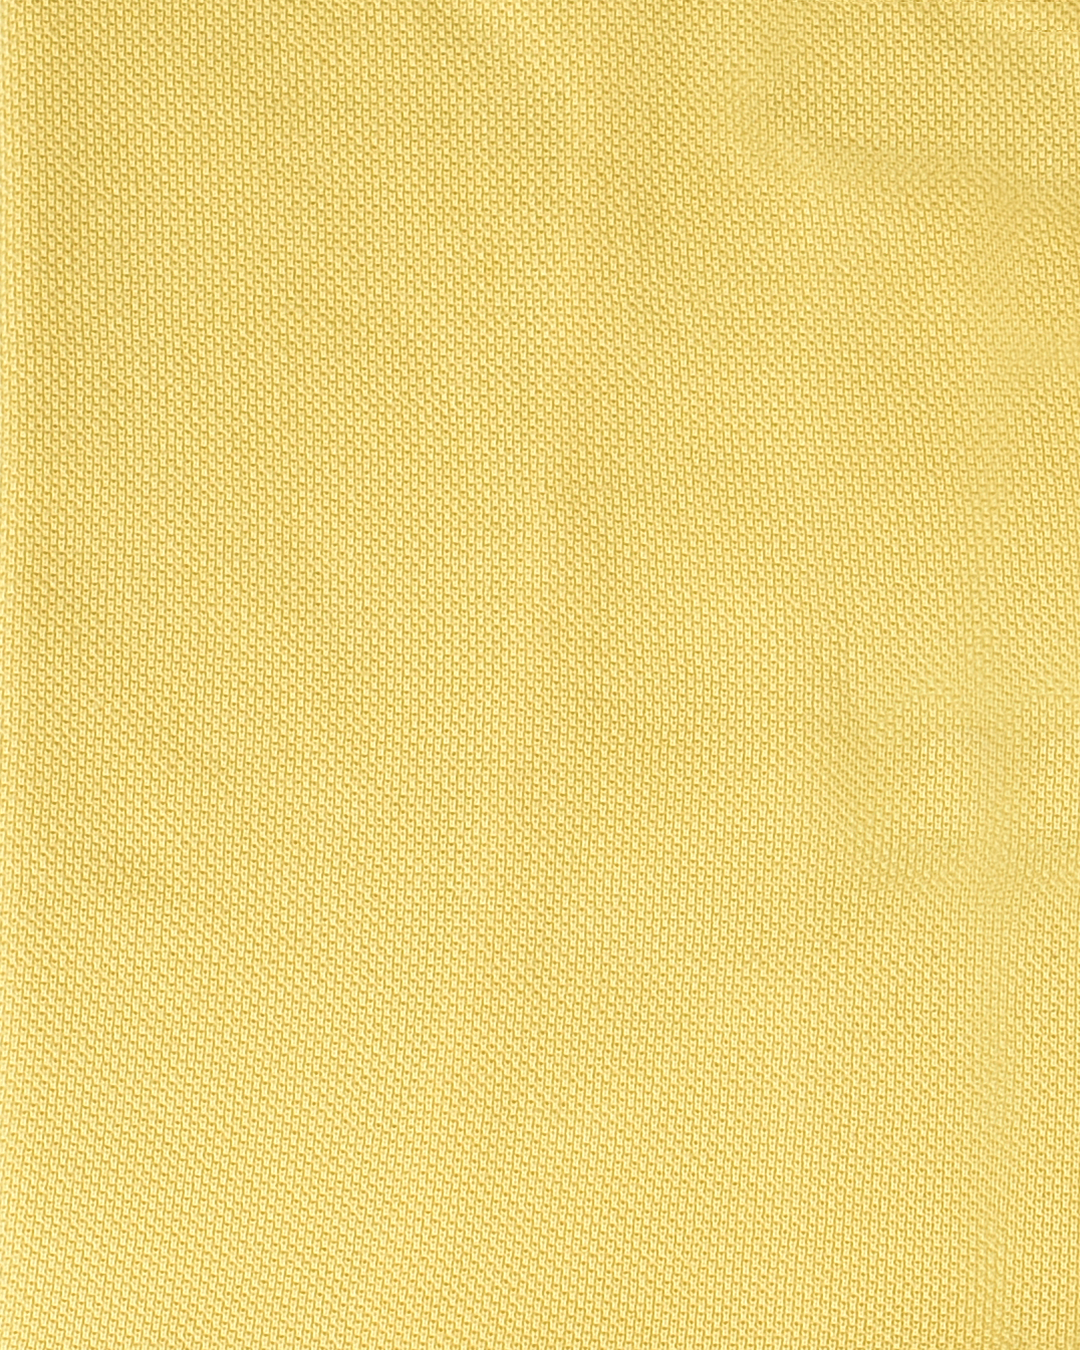 Close up of the custom oxford polo shirt for men by Luxire in light yellow